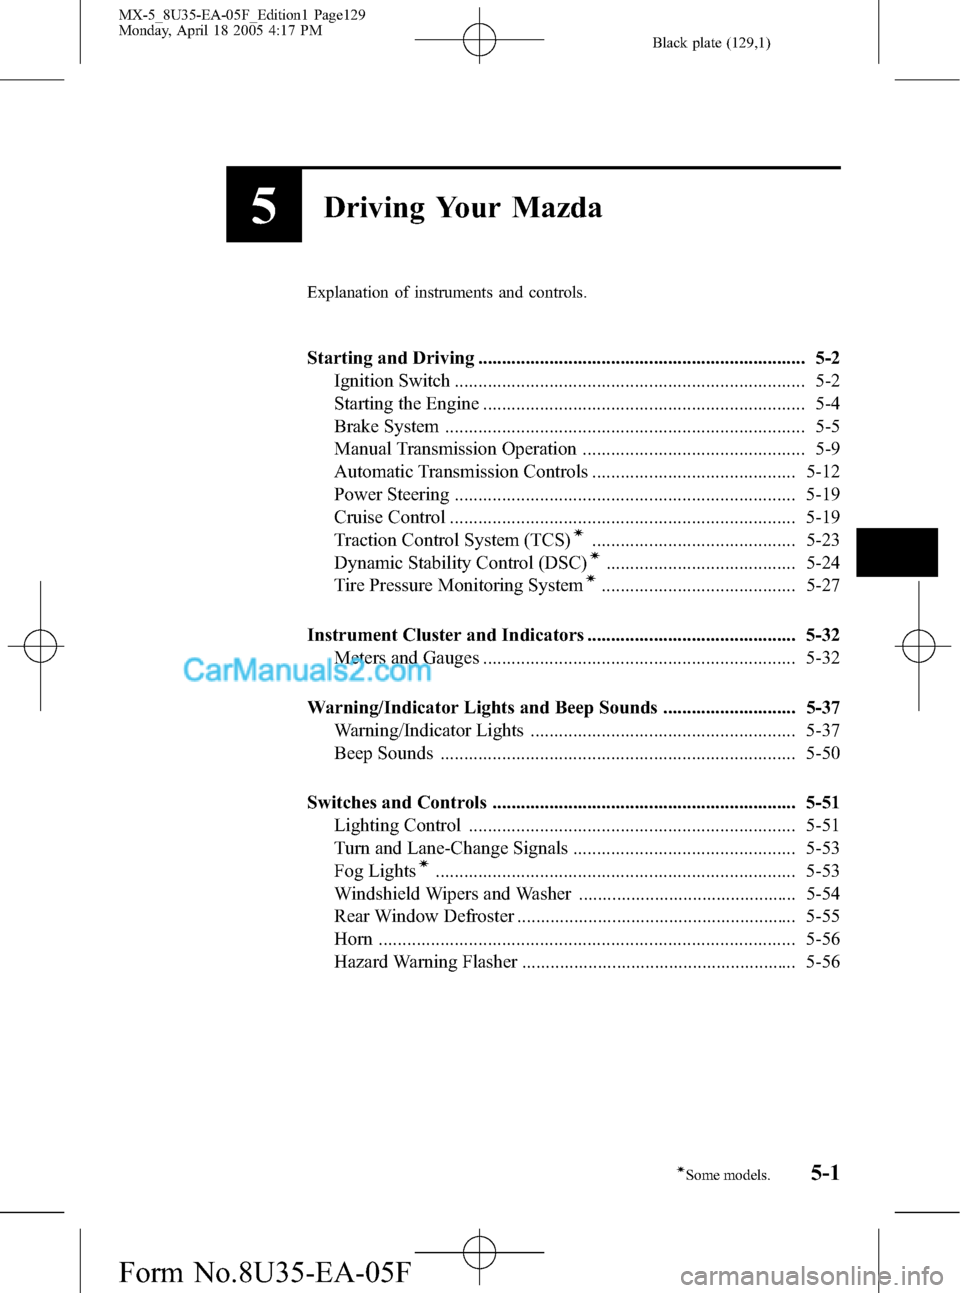 MAZDA MODEL MX-5 2006  Owners Manual (in English) Black plate (129,1)
5Driving Your Mazda
Explanation of instruments and controls.
Starting and Driving ..................................................................... 5-2
Ignition Switch ........